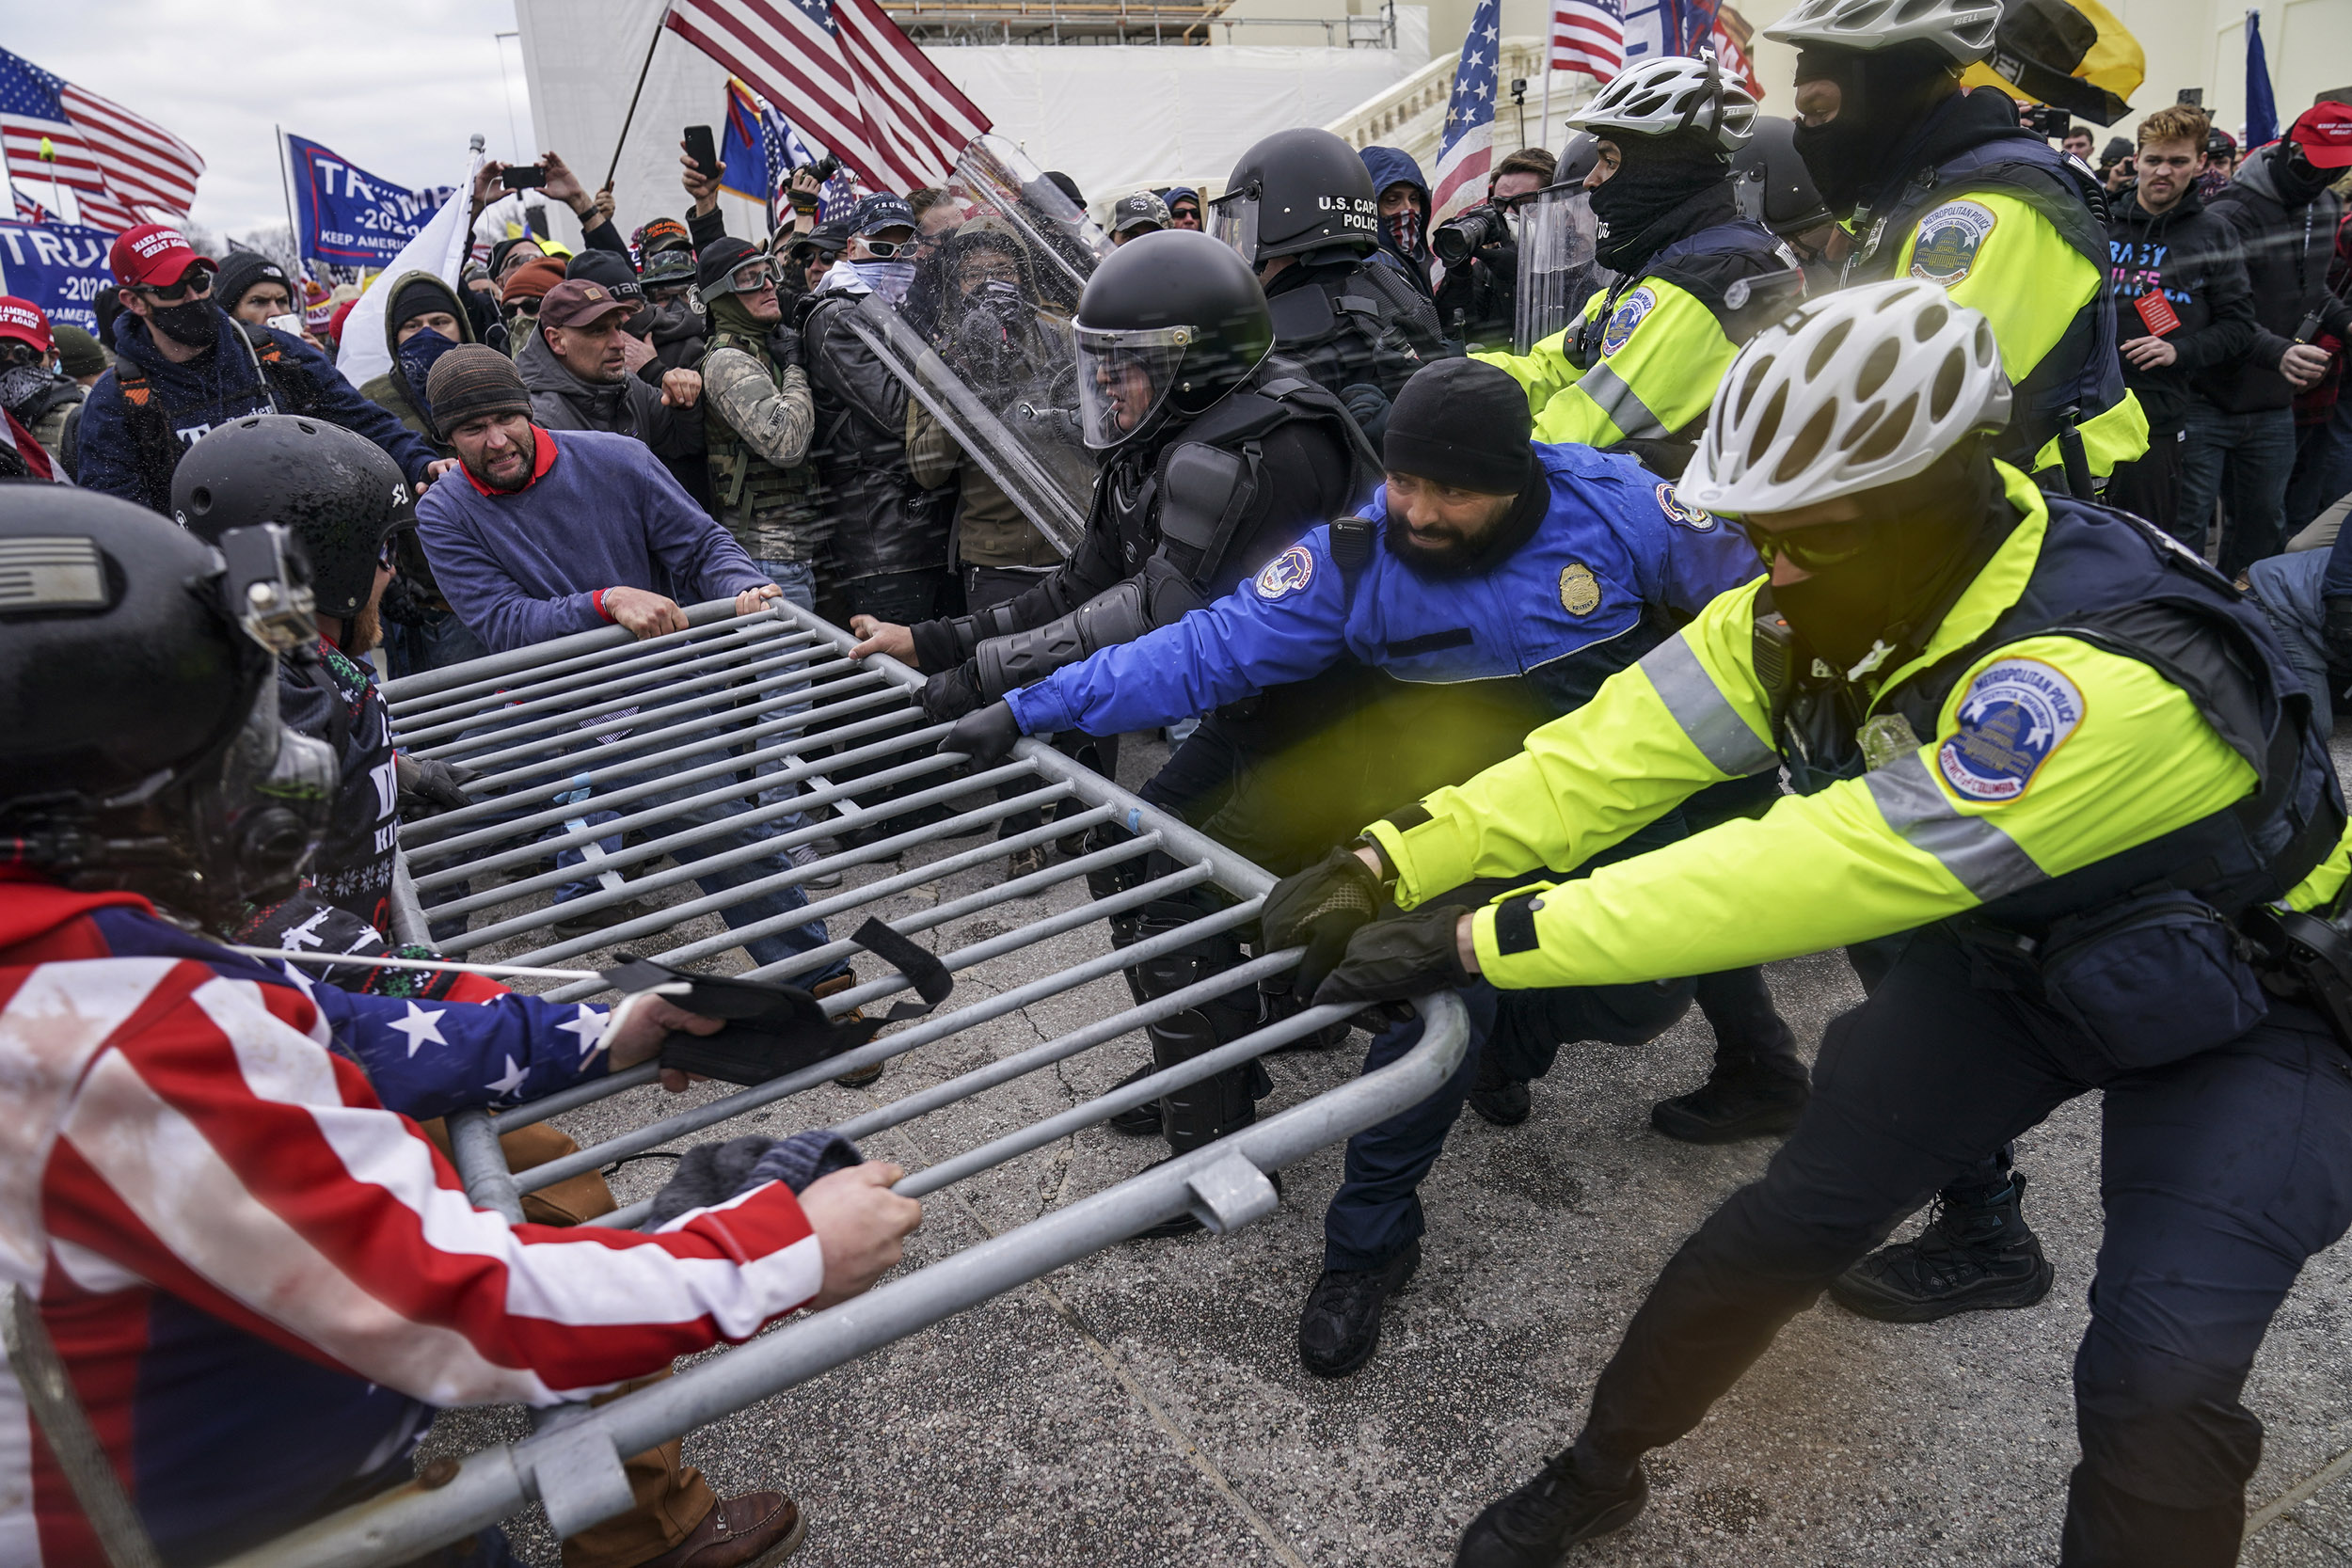 People try to break through barrier at Capitol on Jan. 6, 2021.